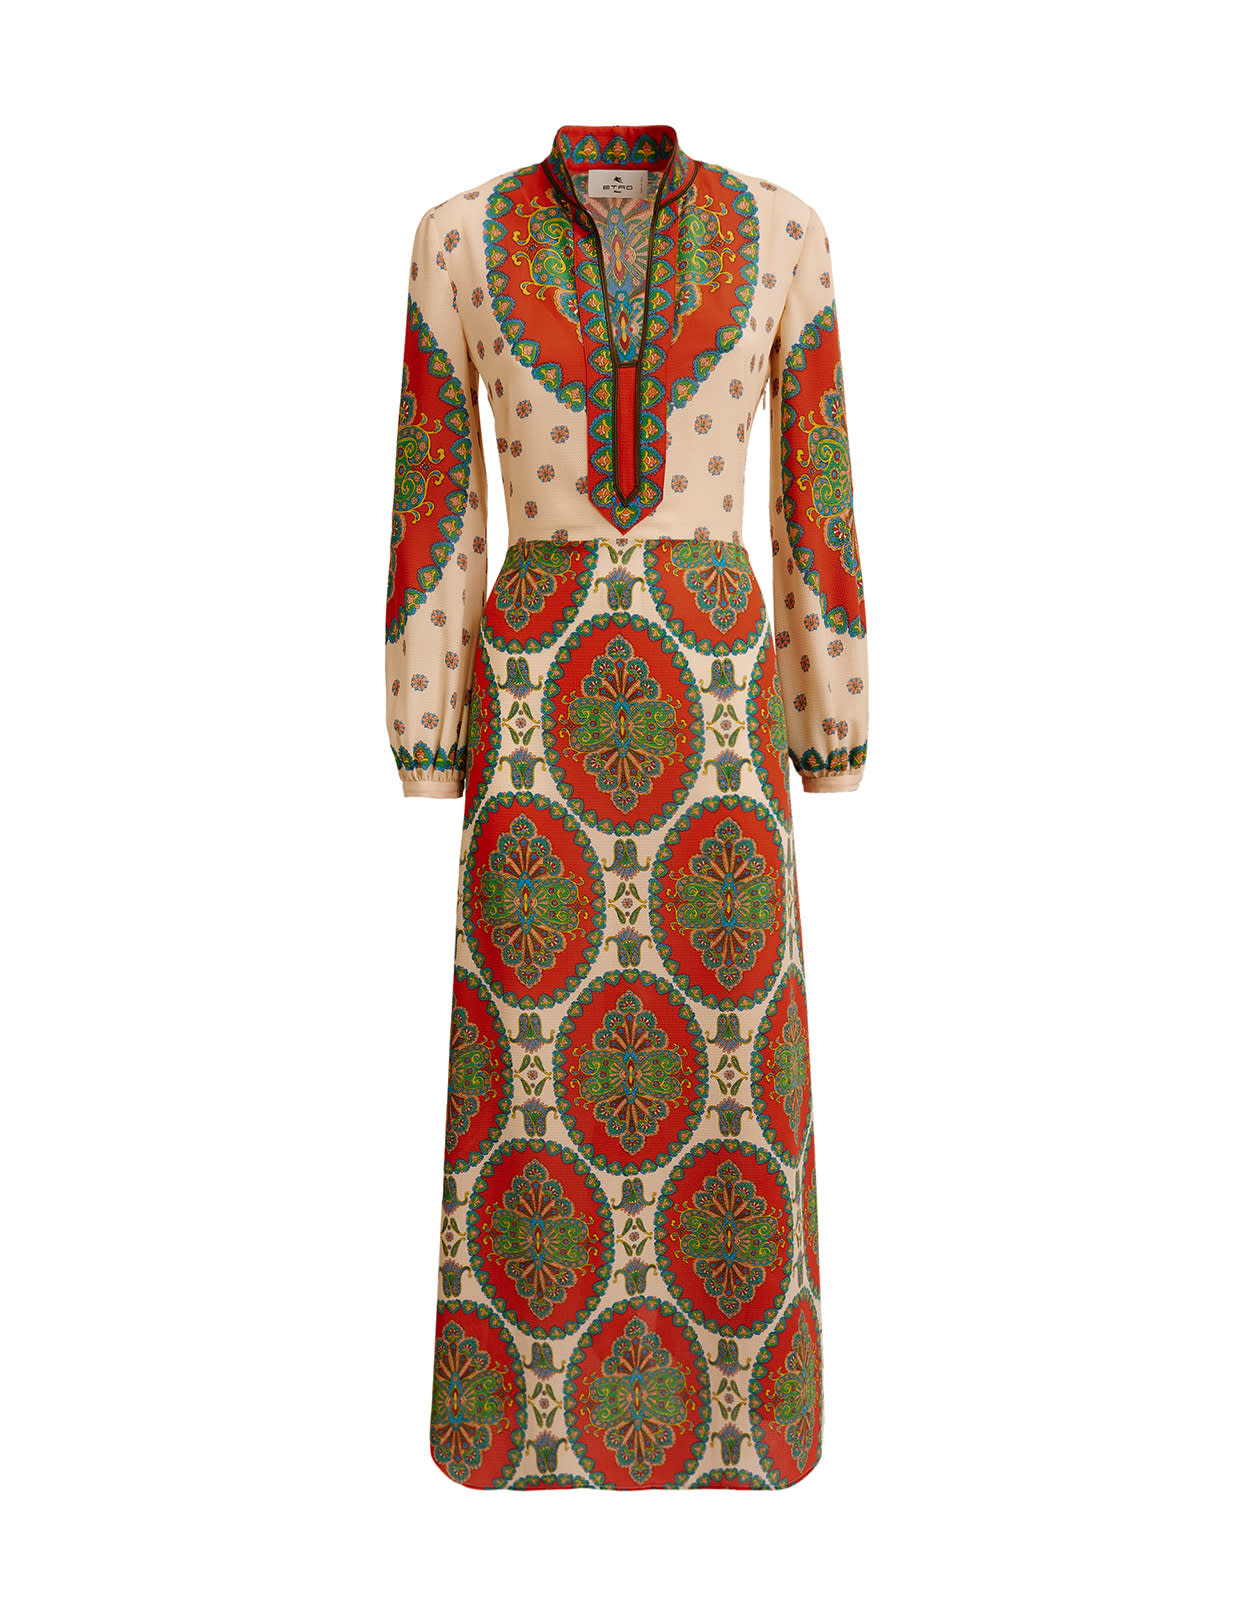 Etro Woman Long Dress In Sable Paisley With Paisley Medallion Print